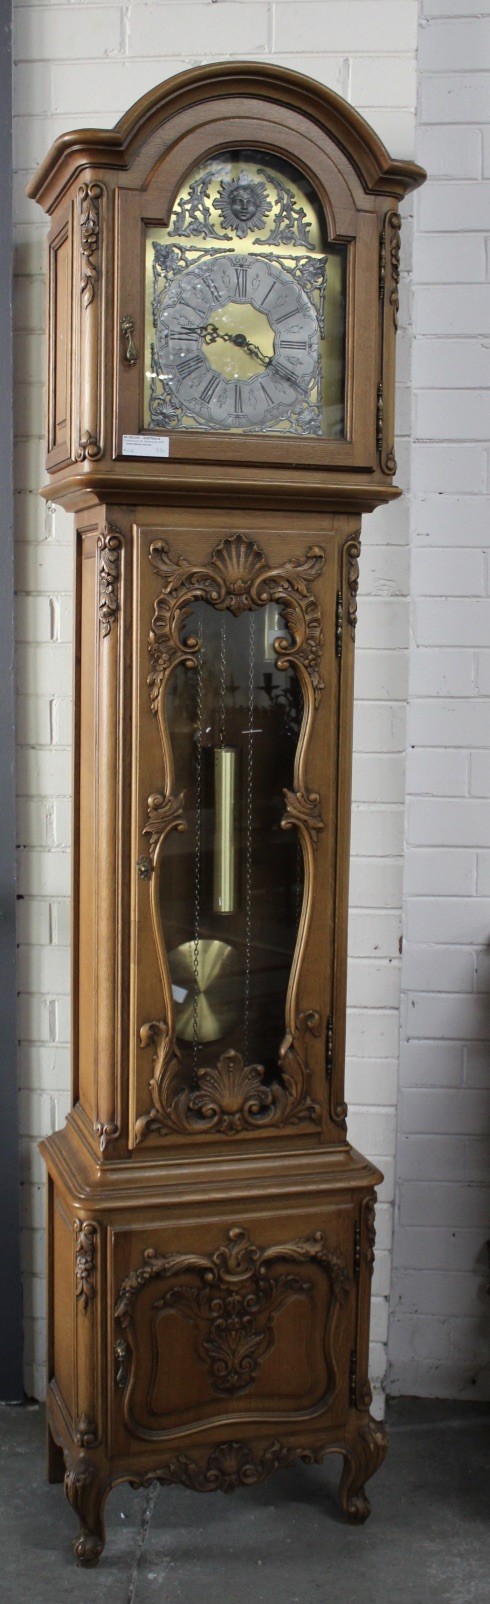 French provincial floral carved oak triple weight grand father clock.